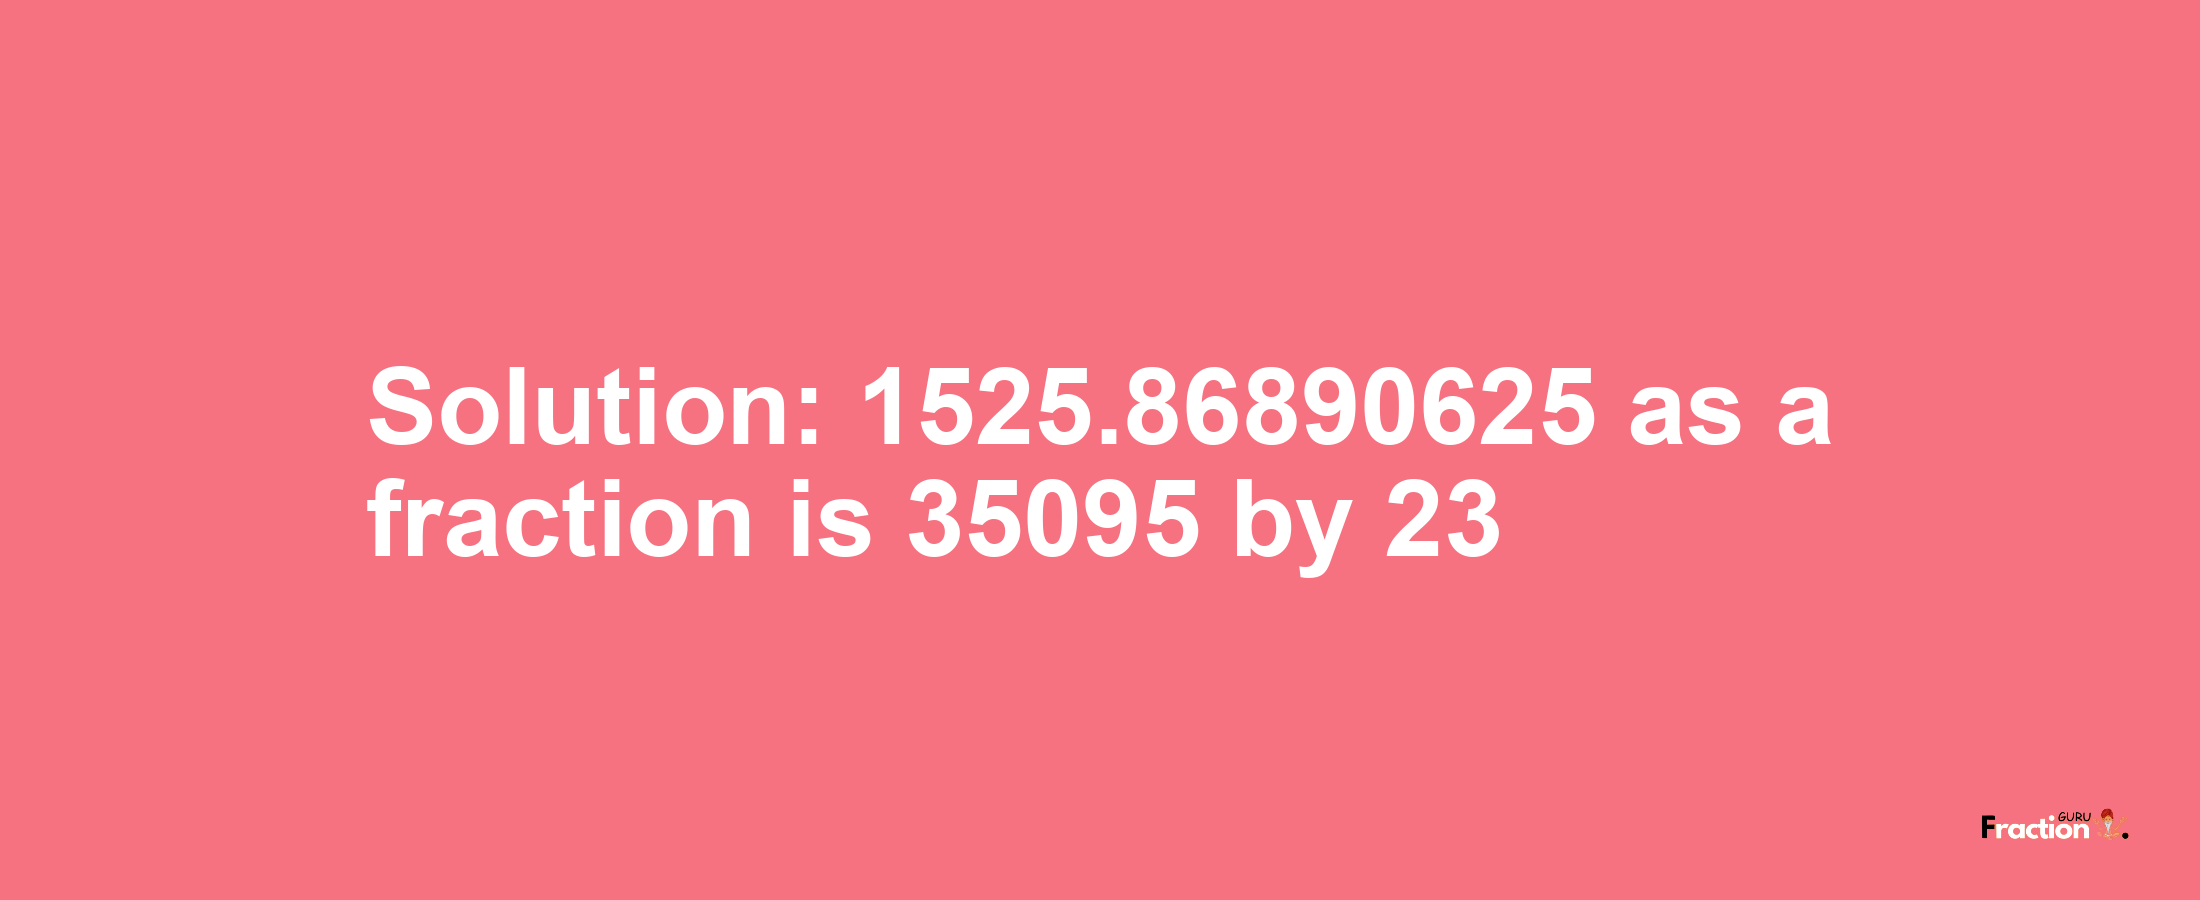 Solution:1525.86890625 as a fraction is 35095/23